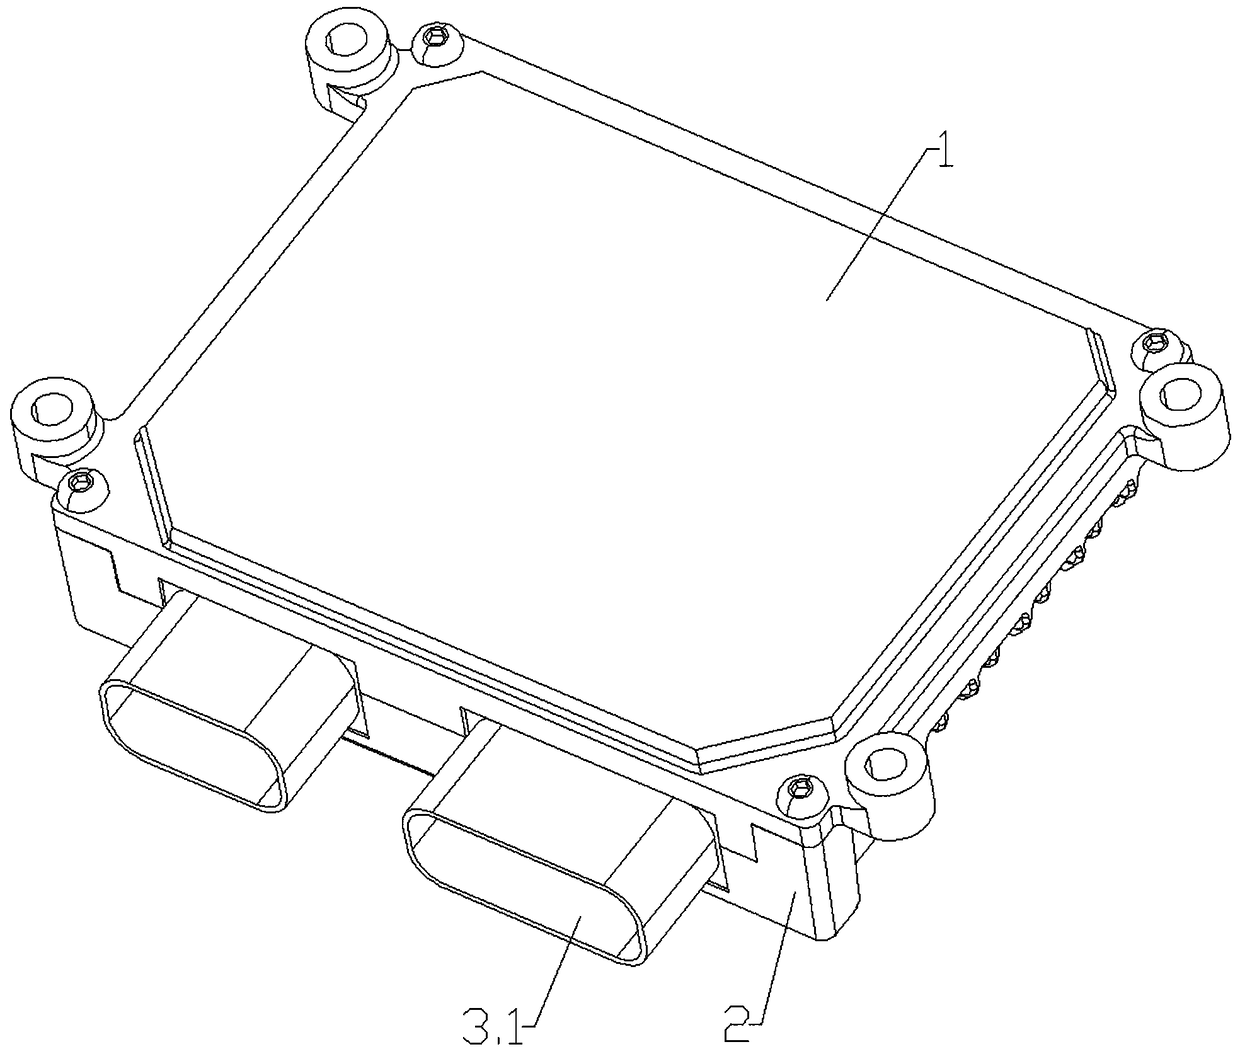 Controller housing assembly